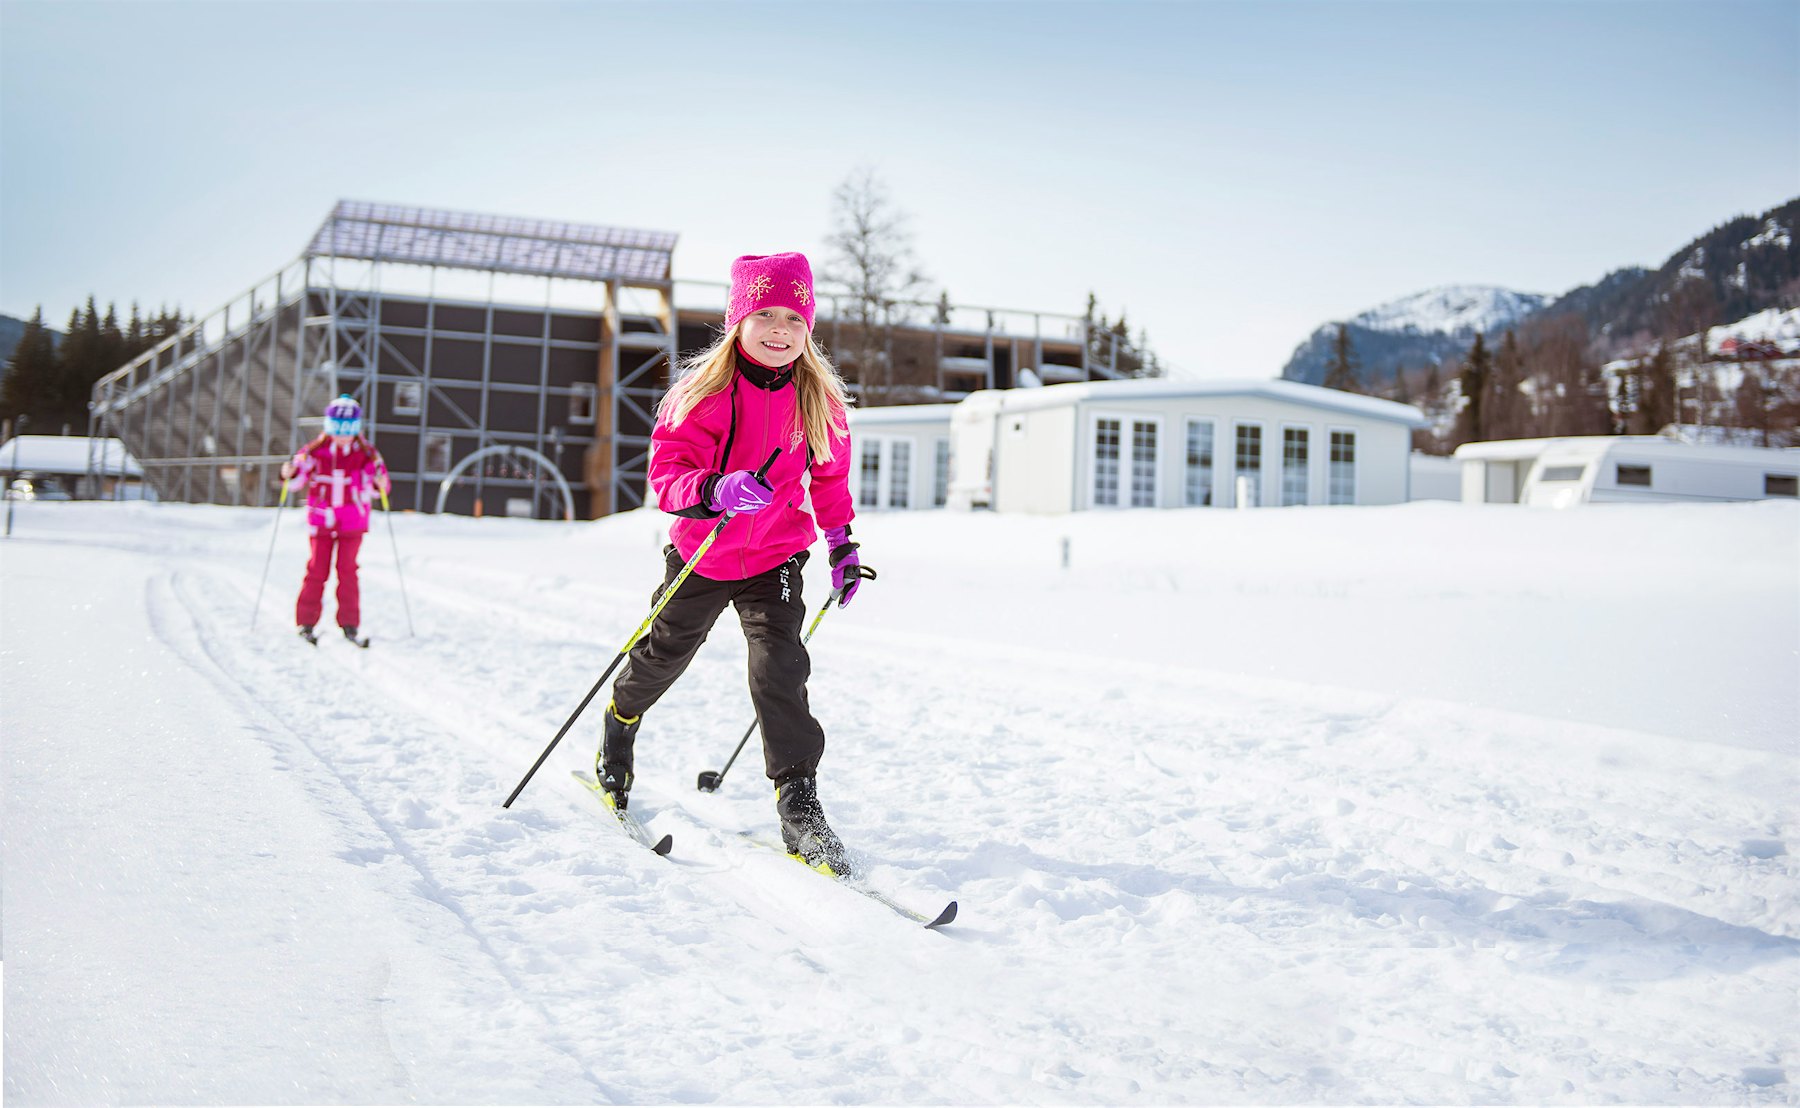 Children have fun in great winter weather on cross-country skis at Topcamp Hallingdal. Photo